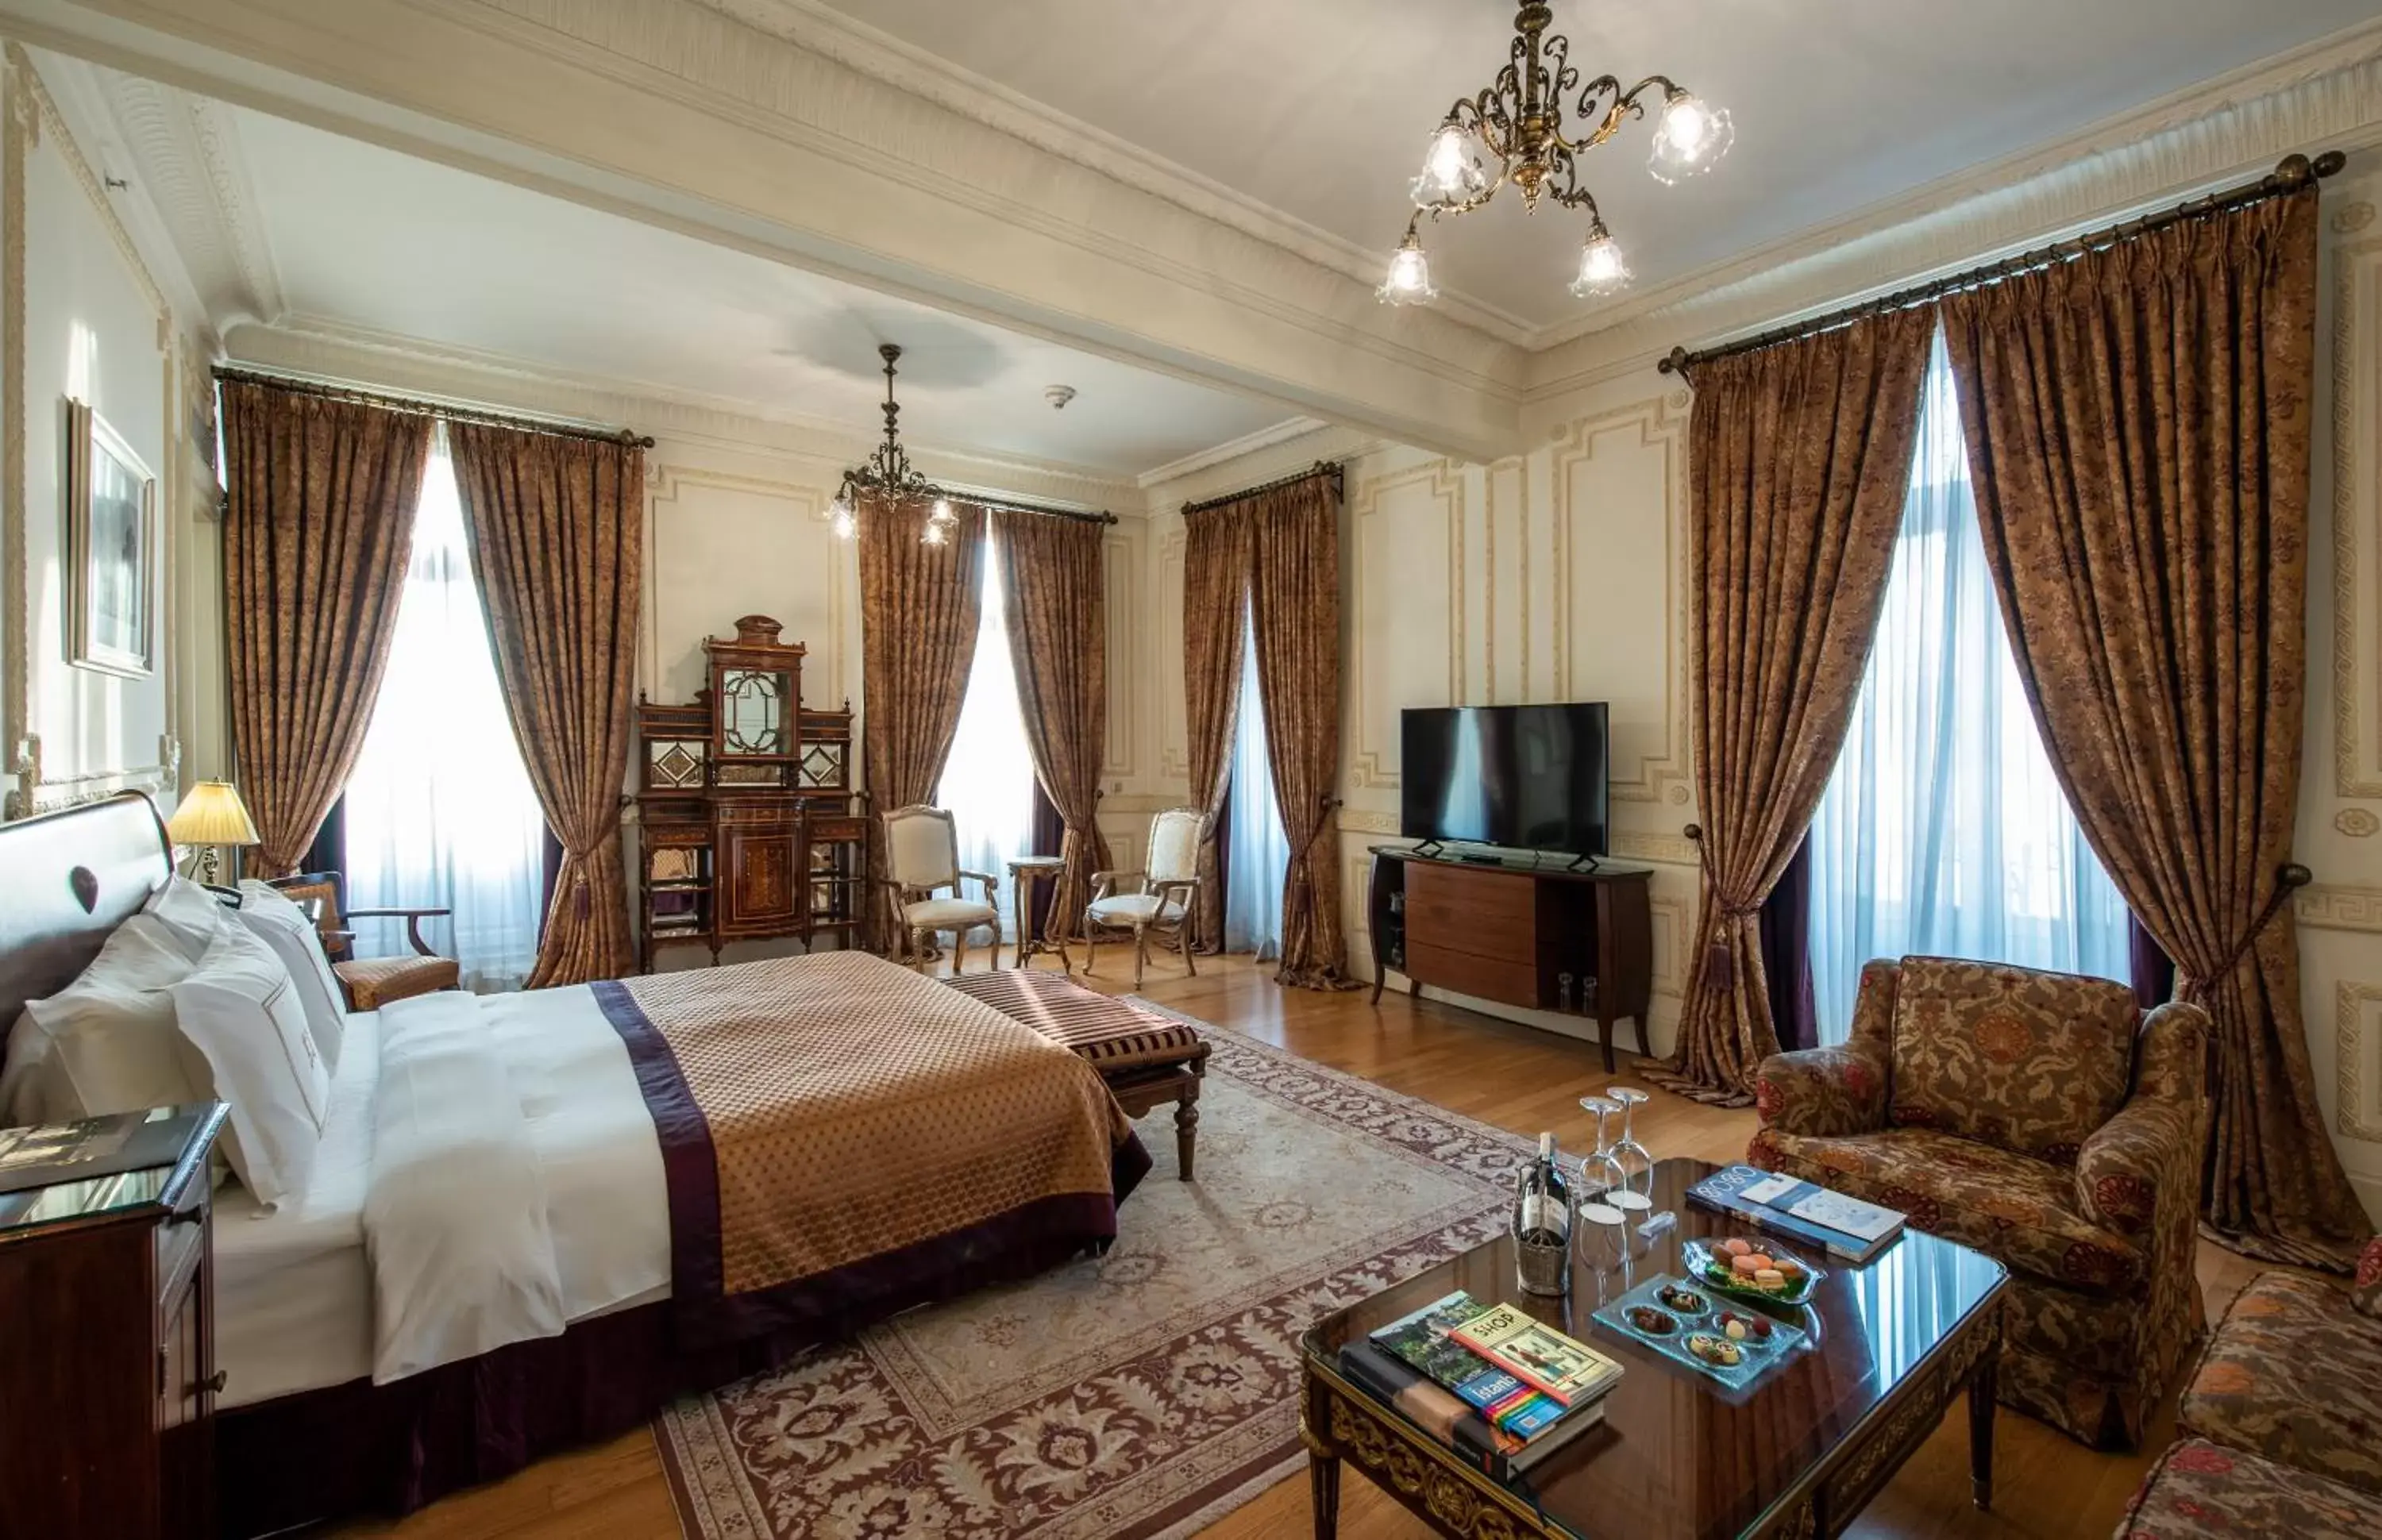 Bedroom in Pera Palace Hotel